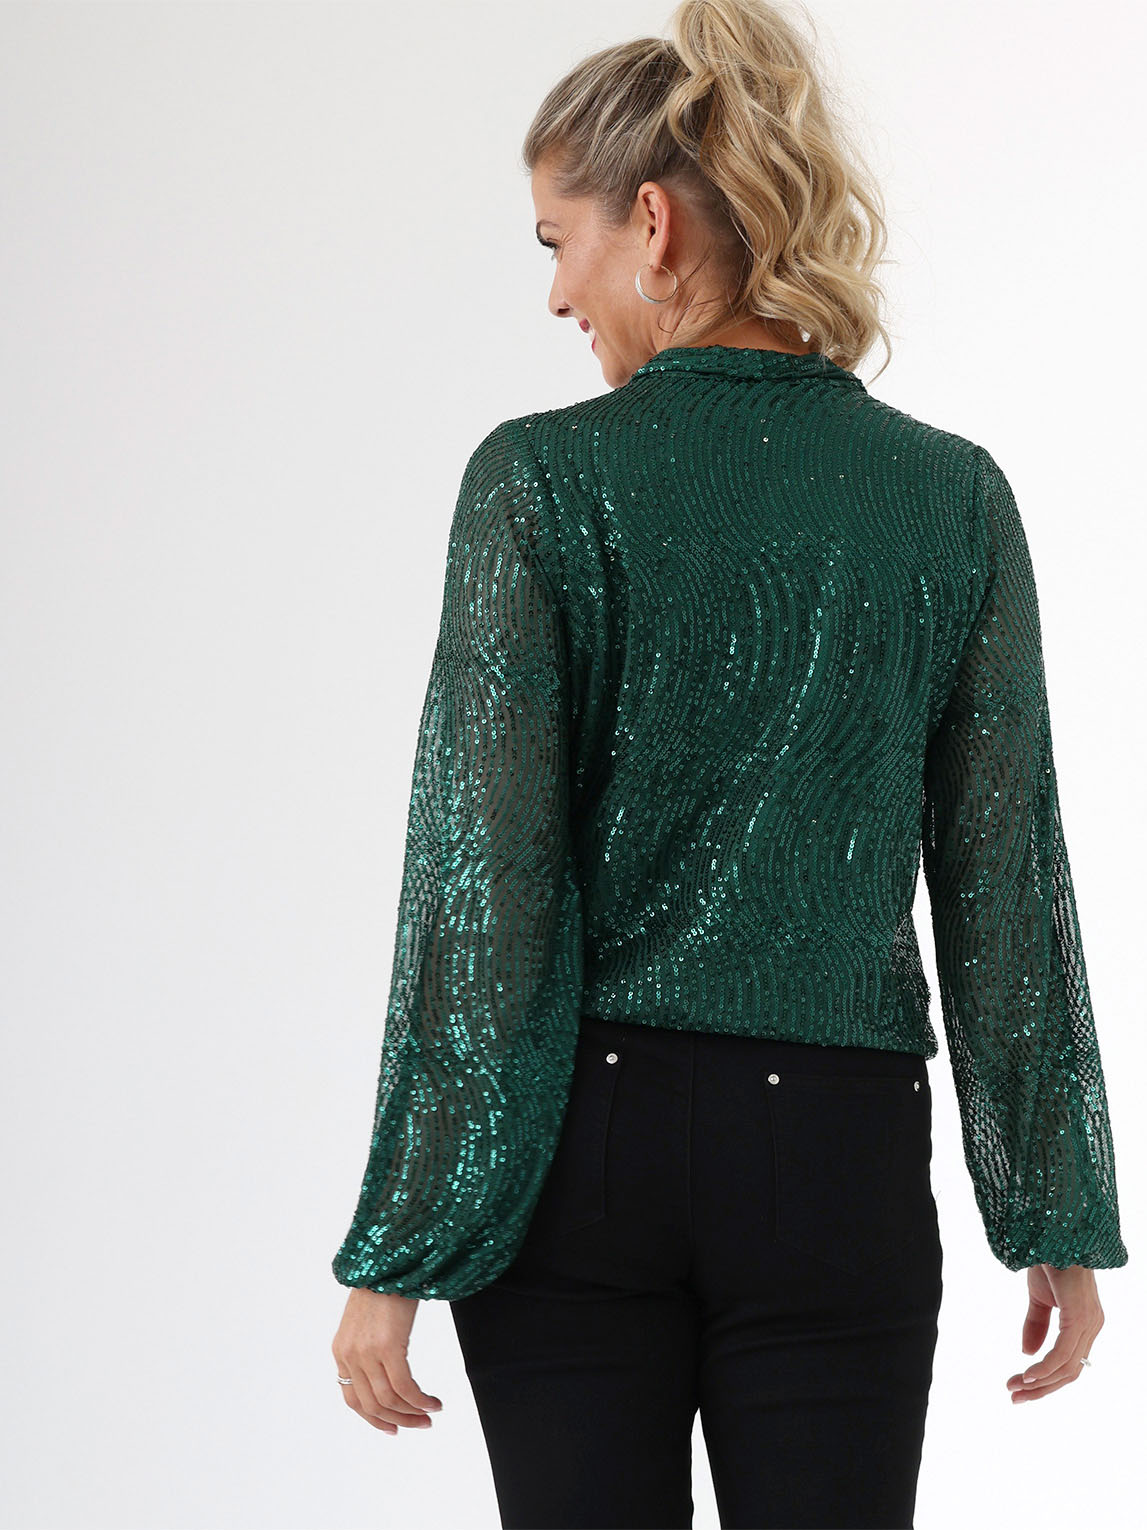 Sequin Wrap Front Top by Haver